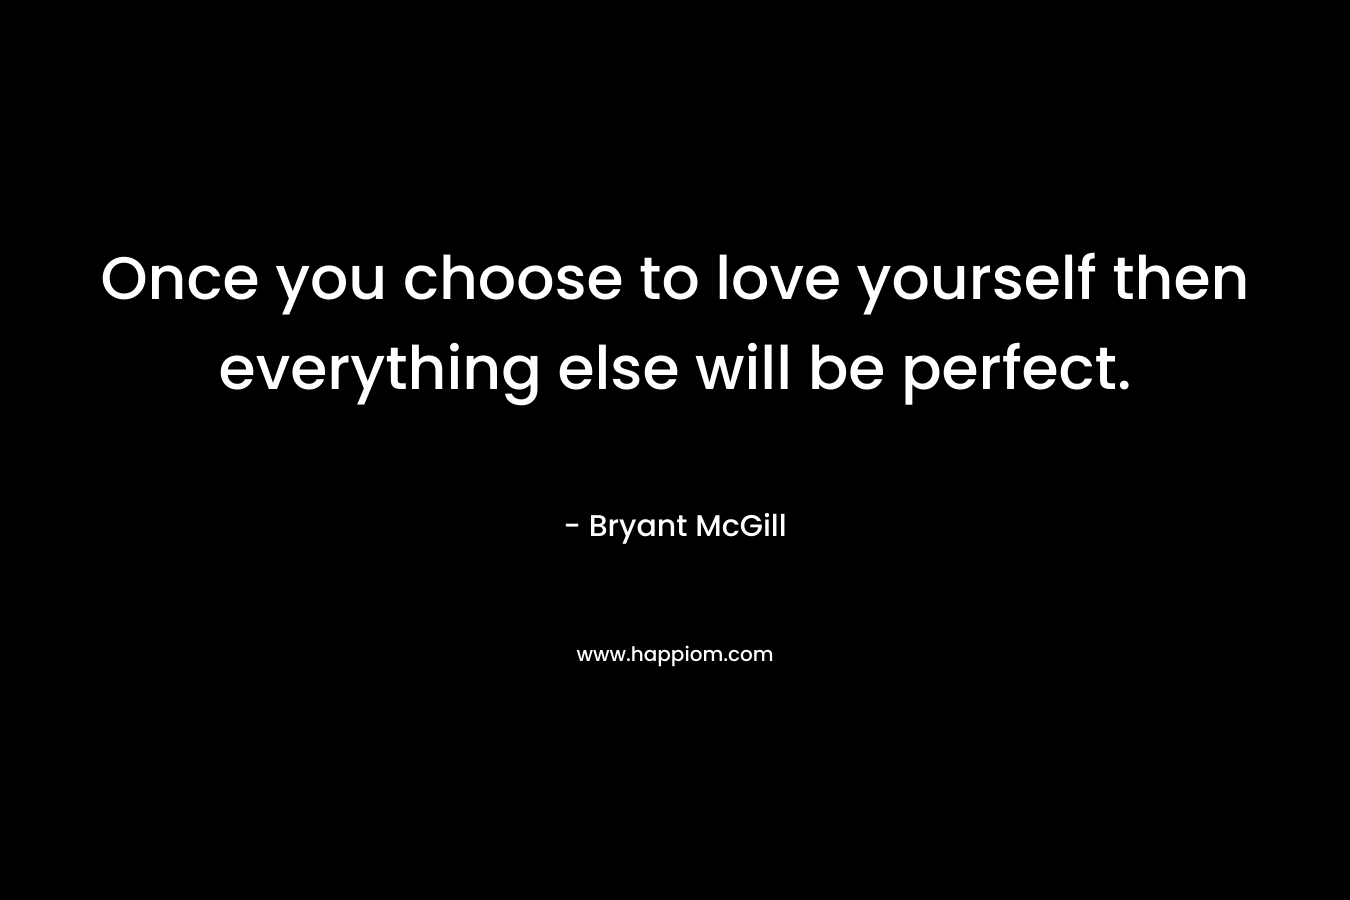 Once you choose to love yourself then everything else will be perfect.